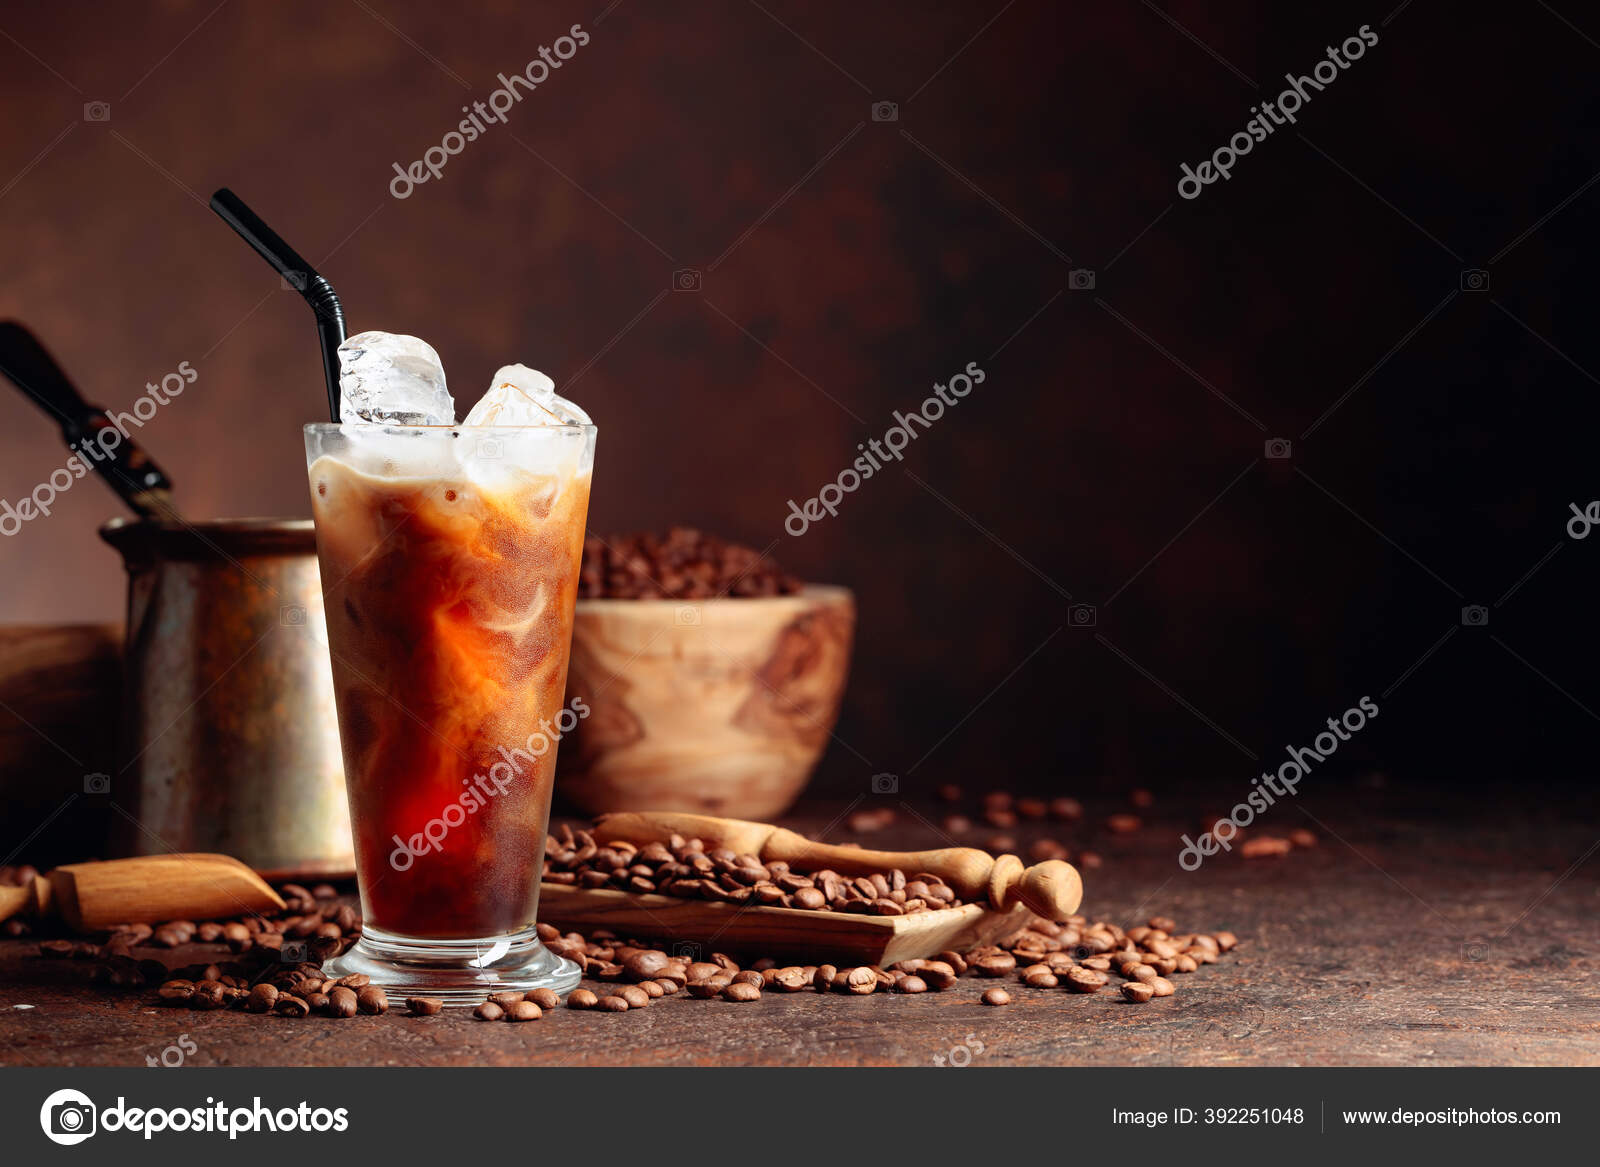 Ice coffee in a glass with cream poured over and coffee beans